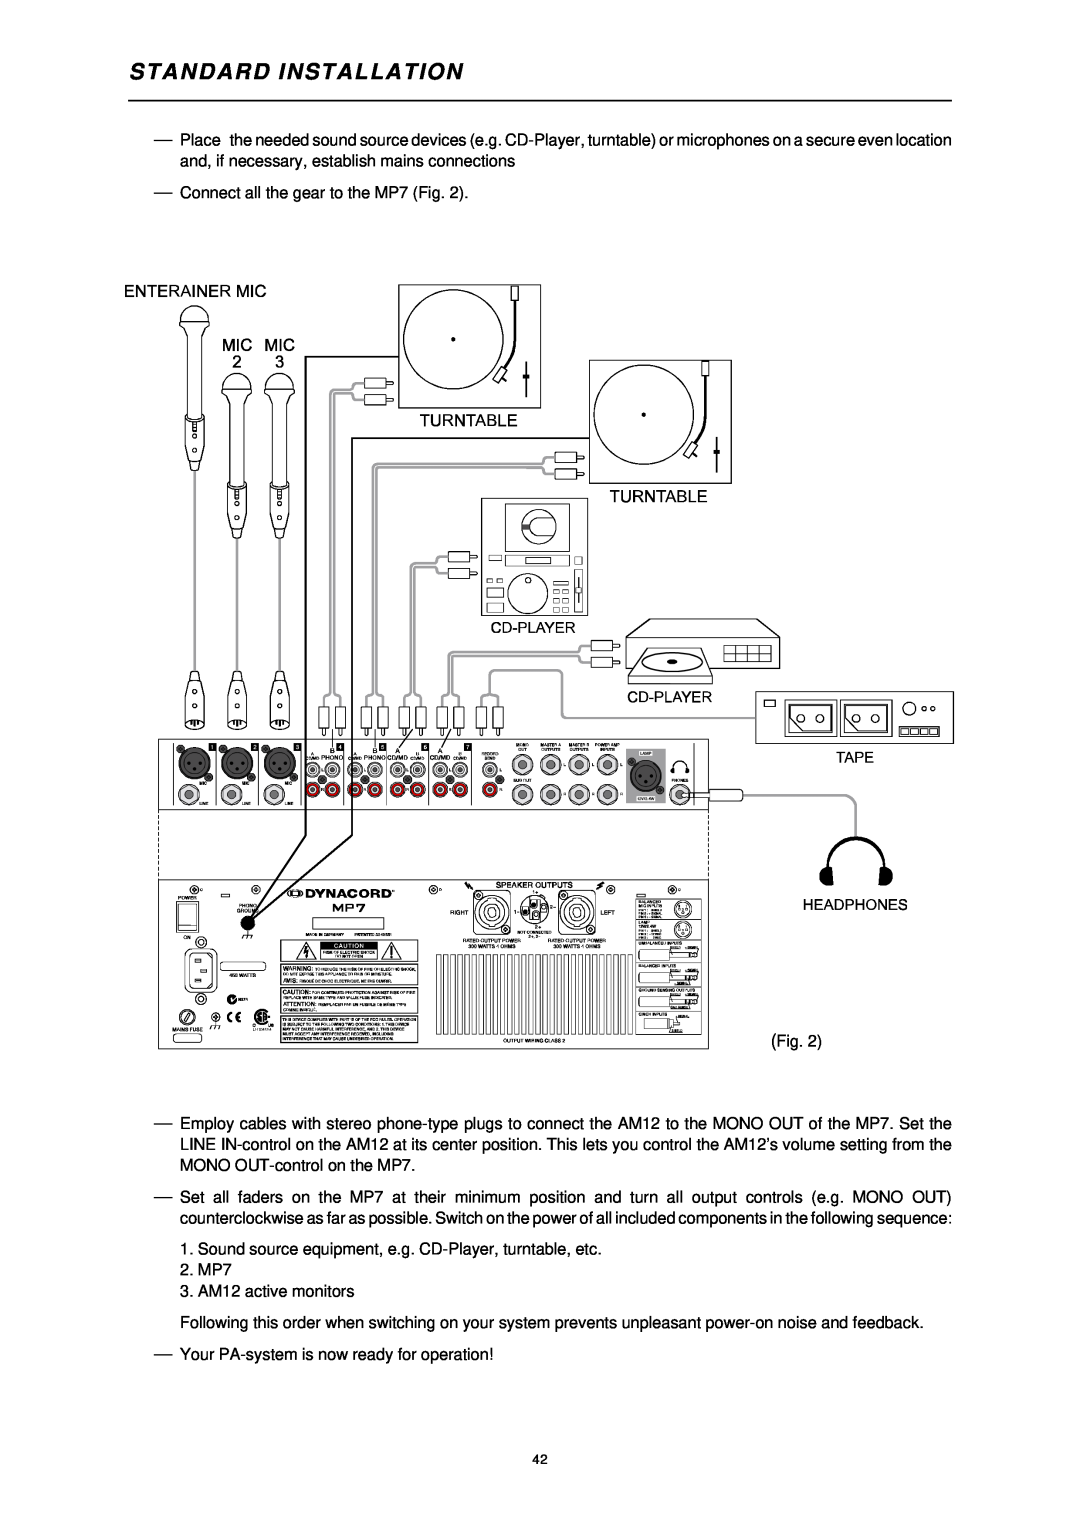 Dynacord ENTERTAINMENT SYSTEM owner manual Standard Installation, Connect all the gear to the MP7 Fig 